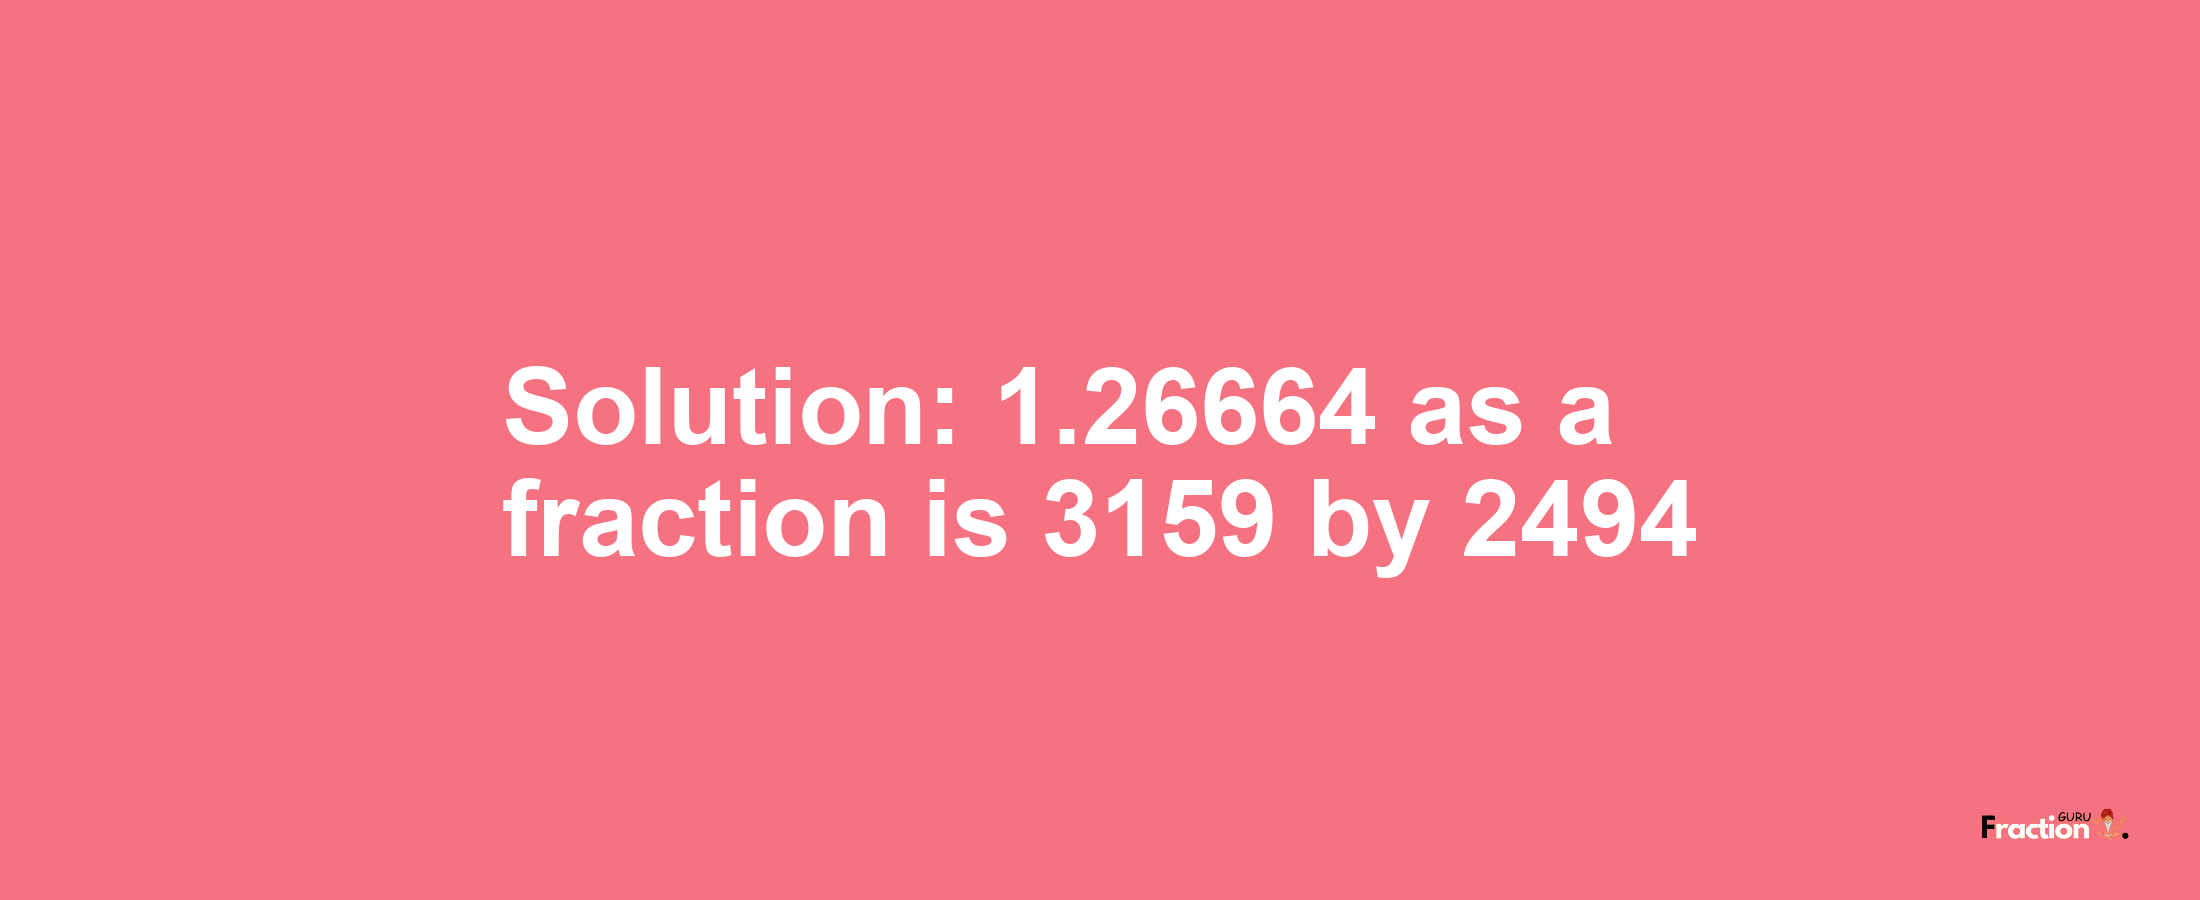 Solution:1.26664 as a fraction is 3159/2494